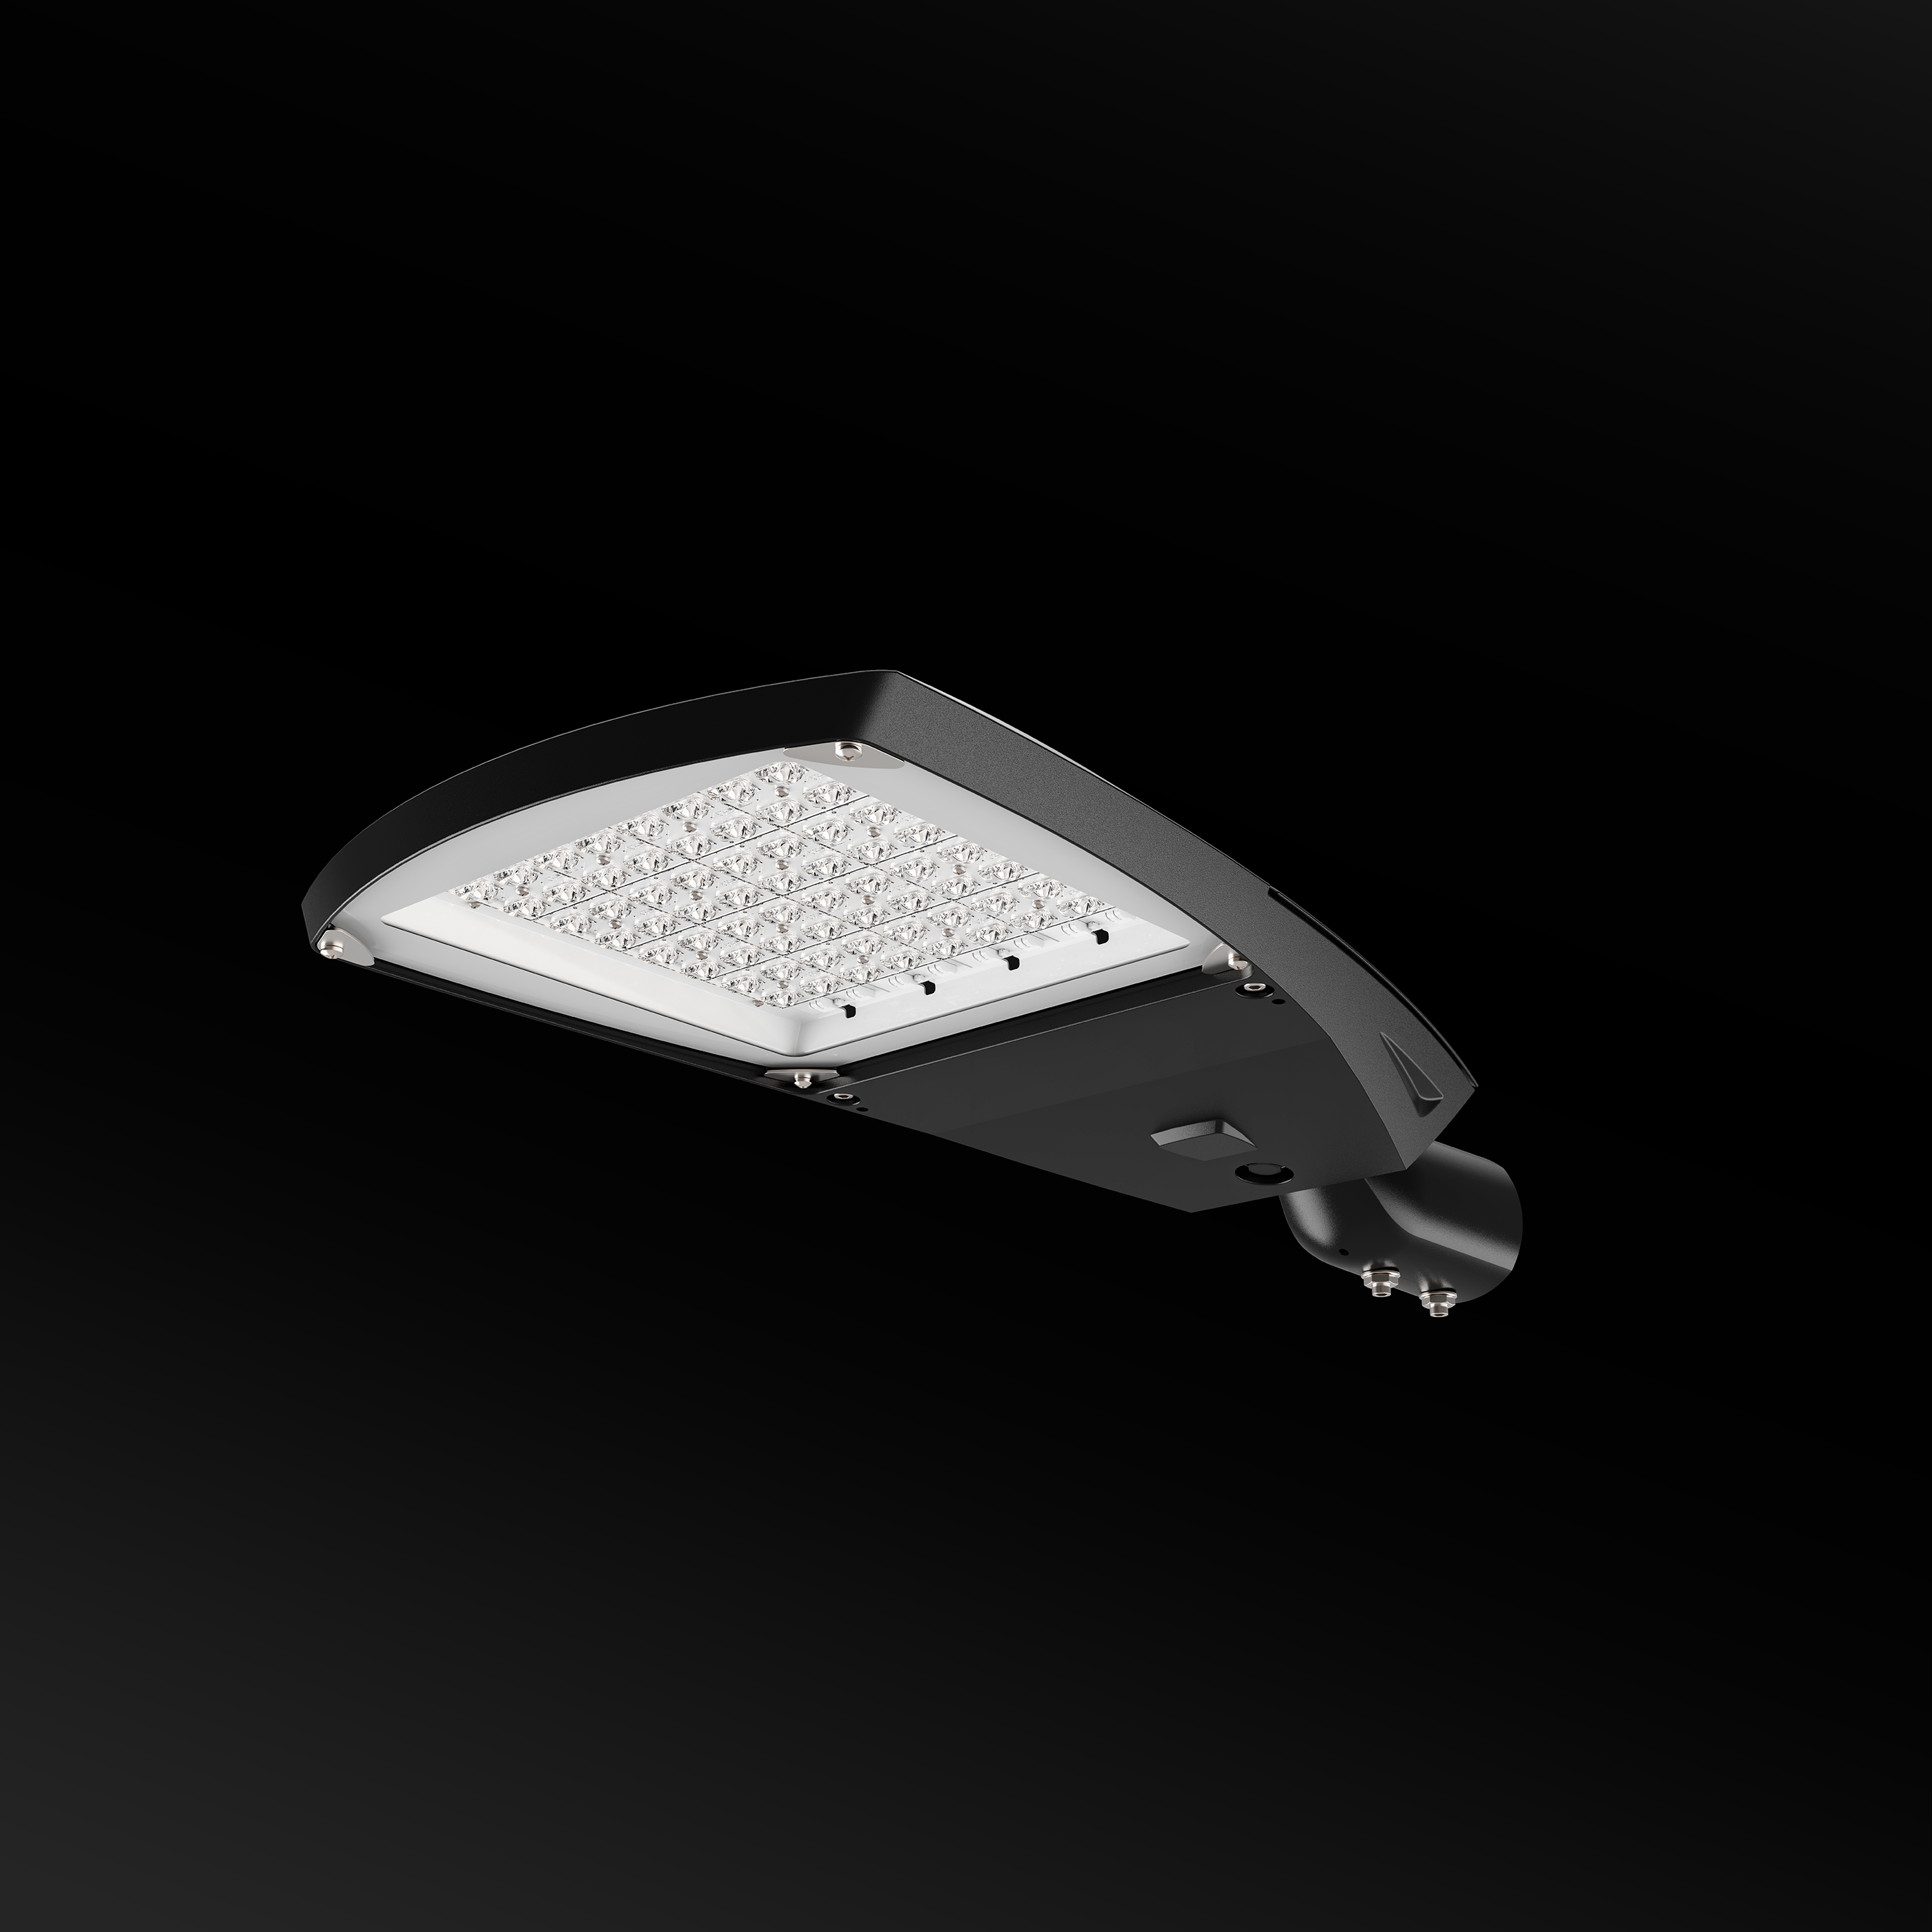 The Nox M's clean lines & subtle profile result in an elegant, modern luminaire suitable for a wide range of urban and infrastructure environments.